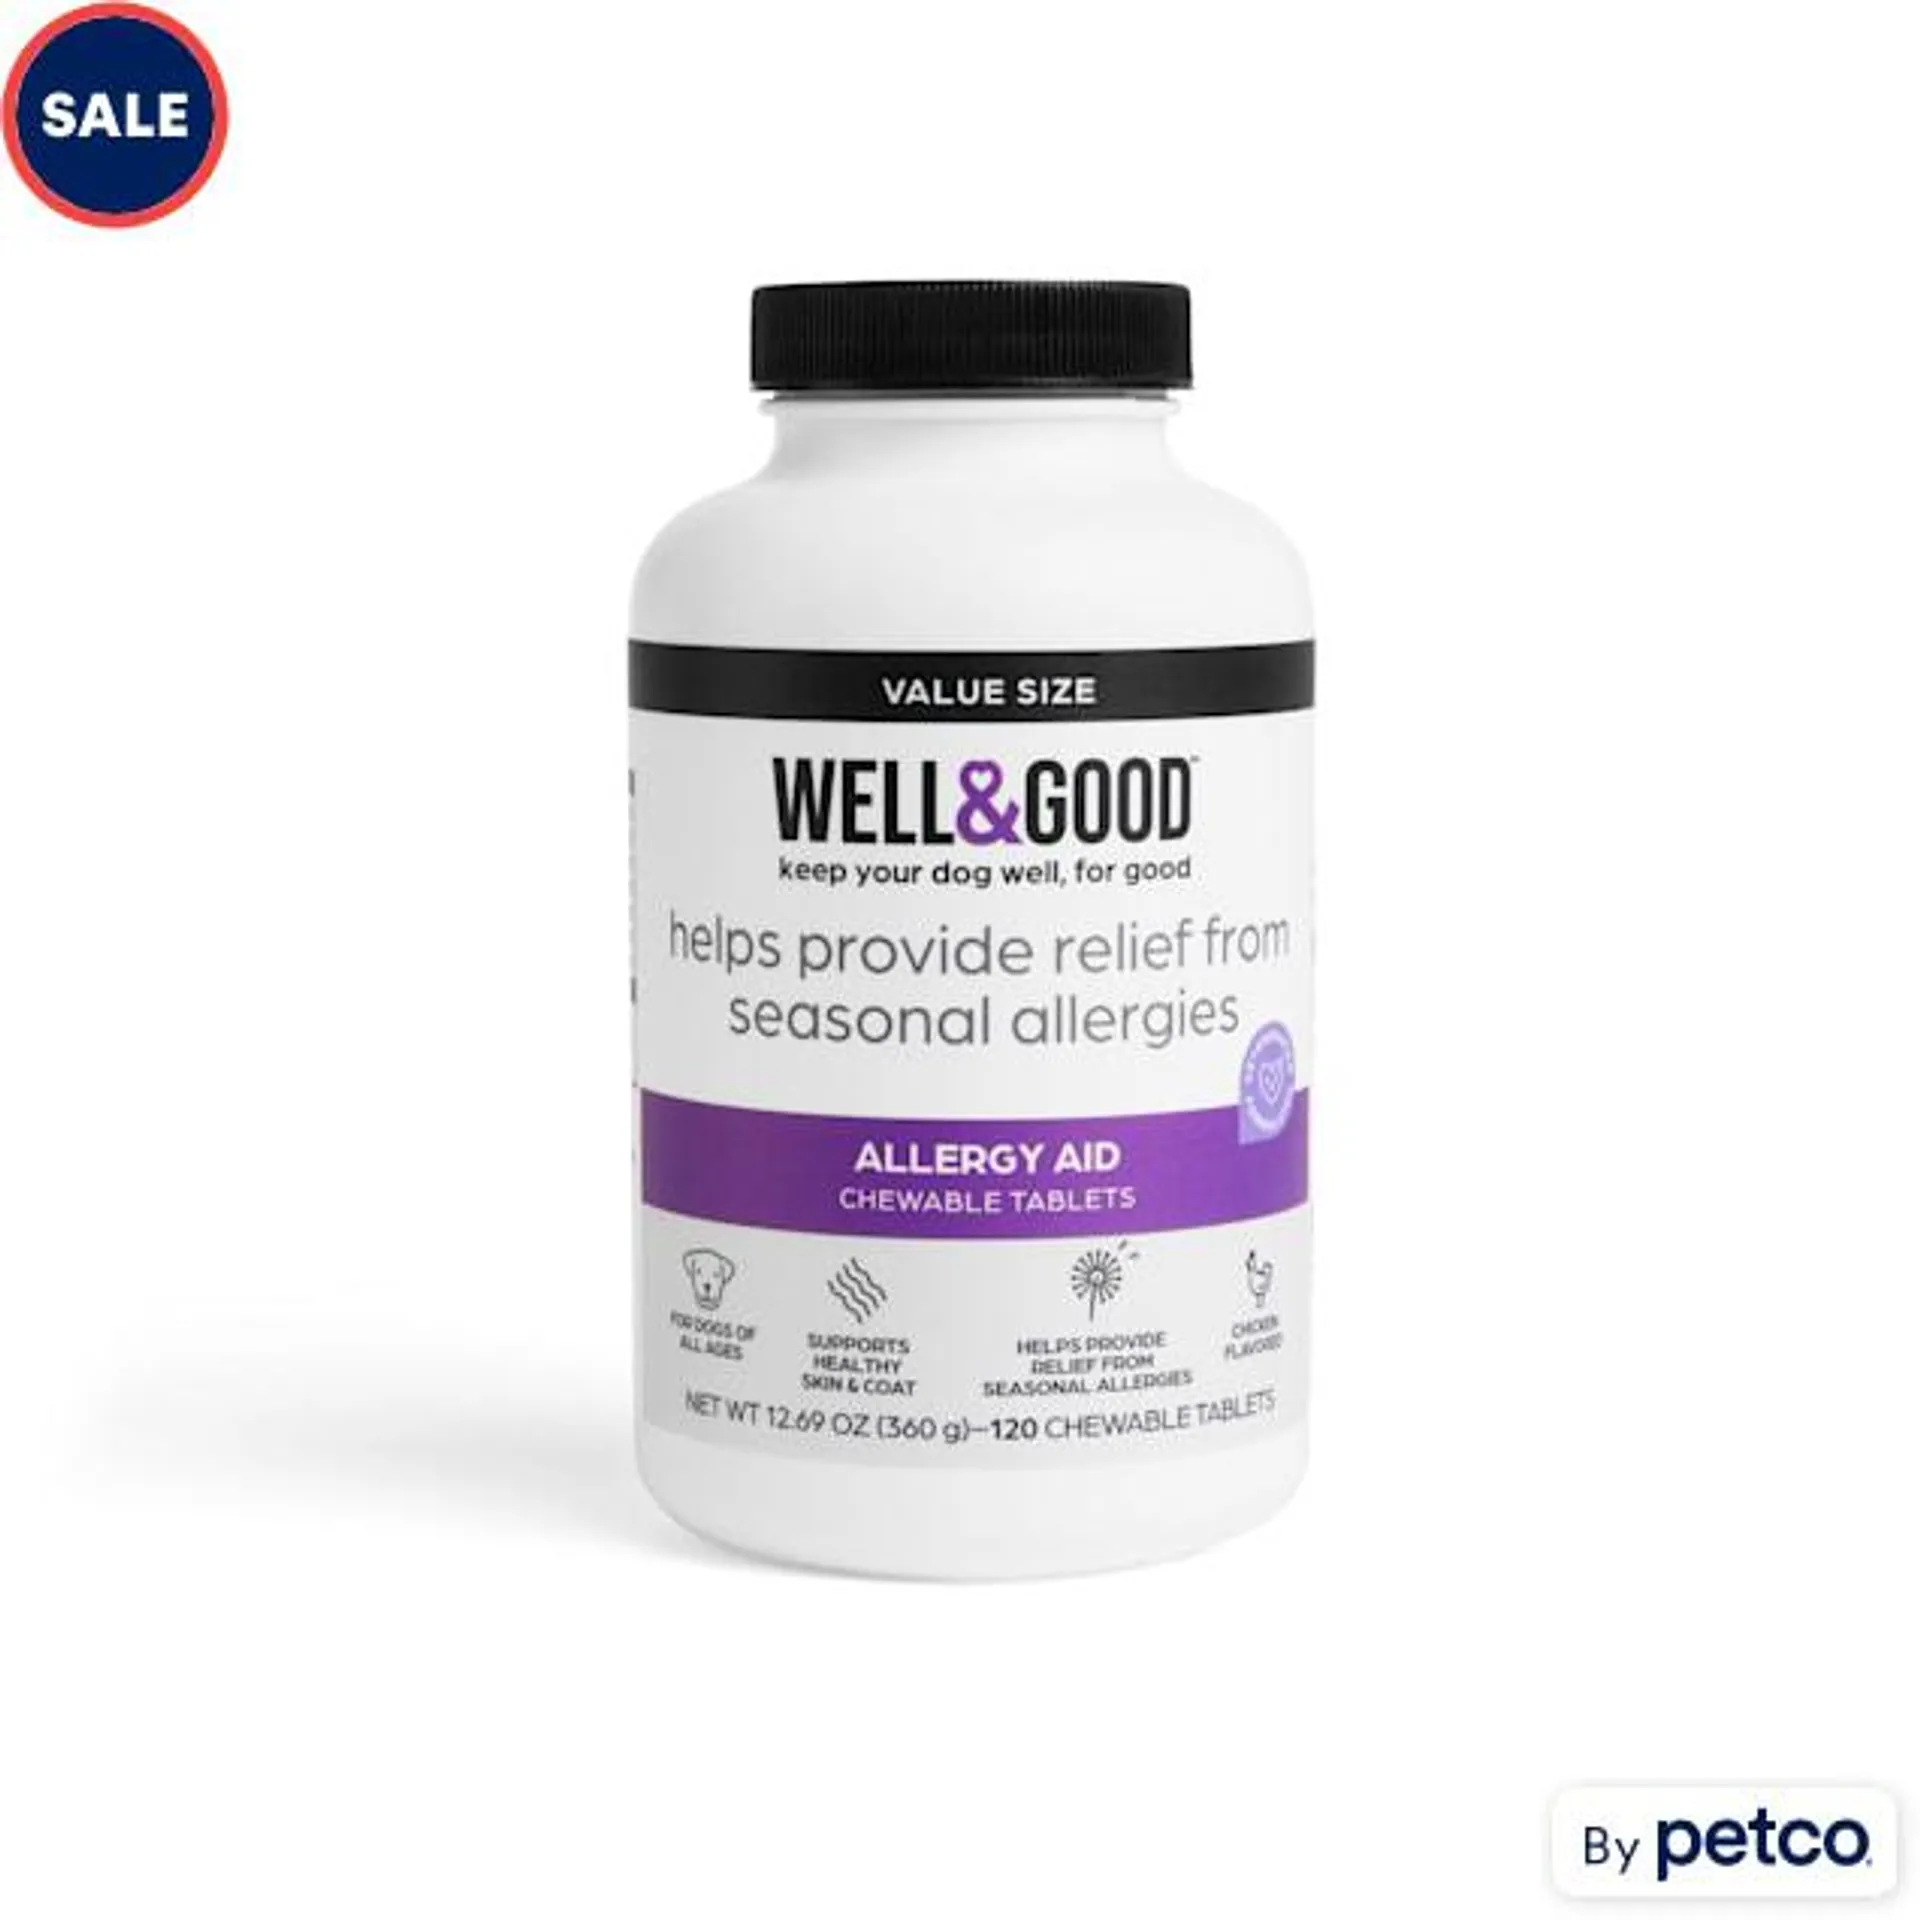 Well & Good Dog Allergy Aid Chewable Tablets, Count of 120